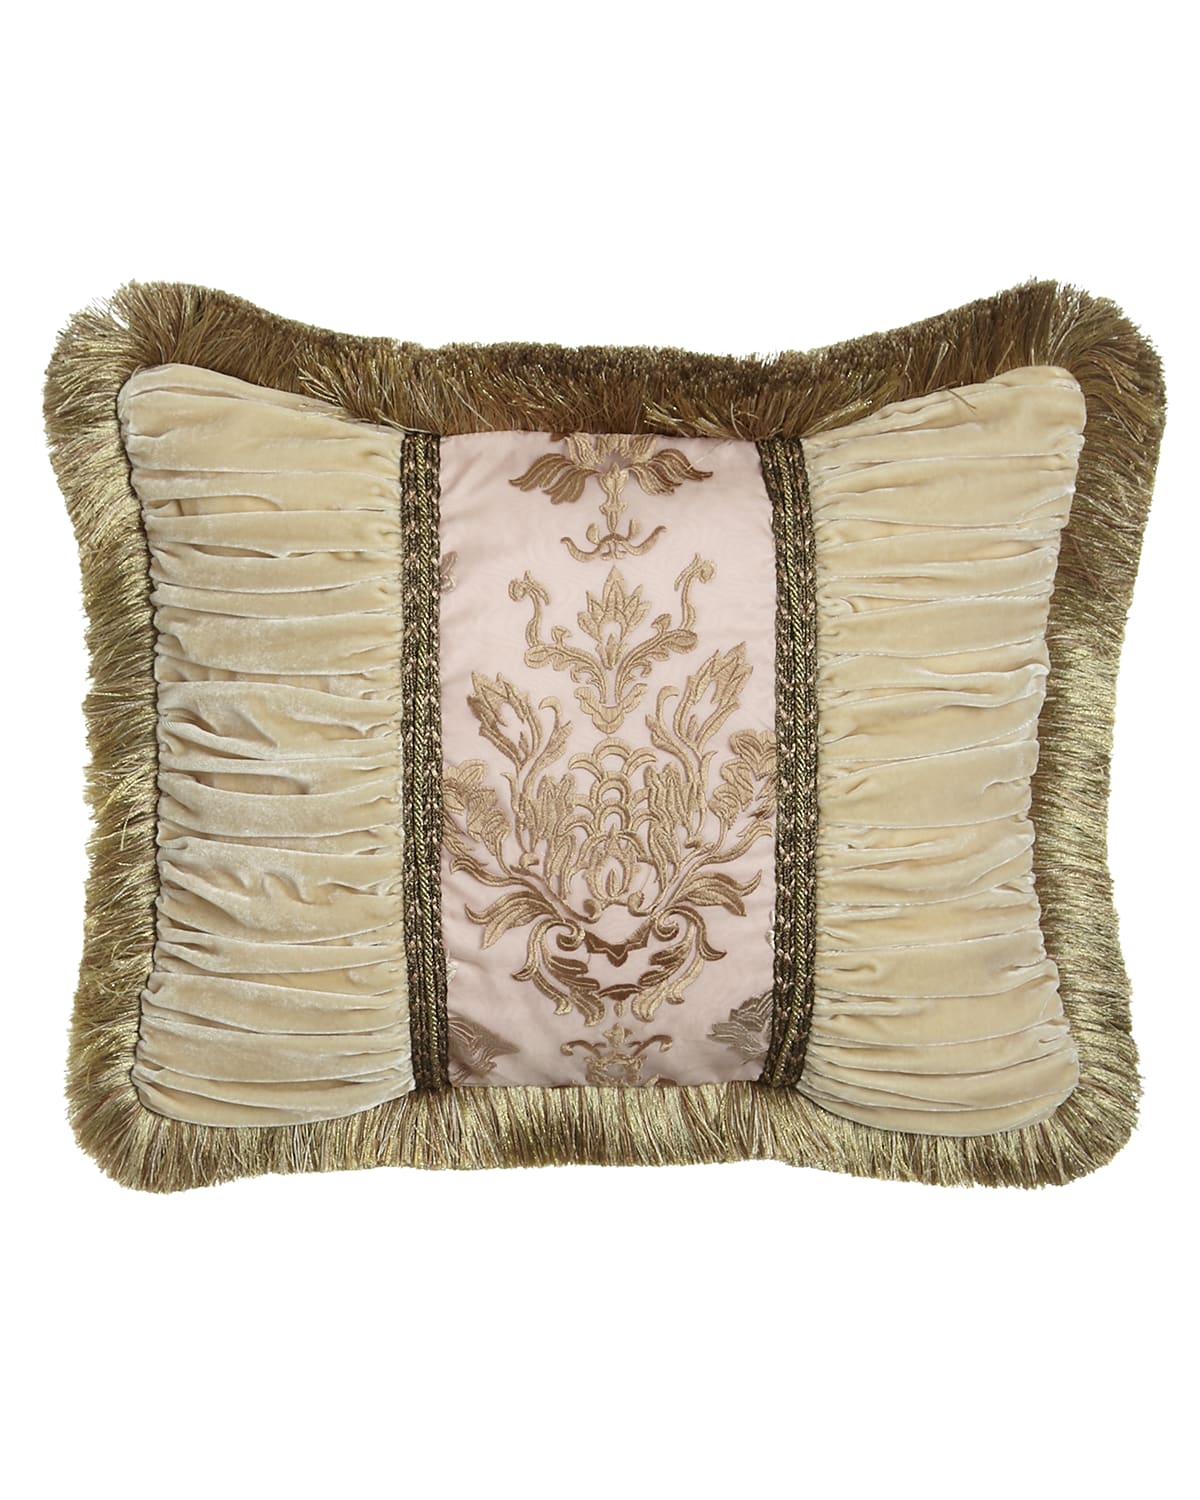 Image Sweet Dreams Alessandra Pillow with Ruched Velvet Sides & Brush Fringe, 16" x 21"